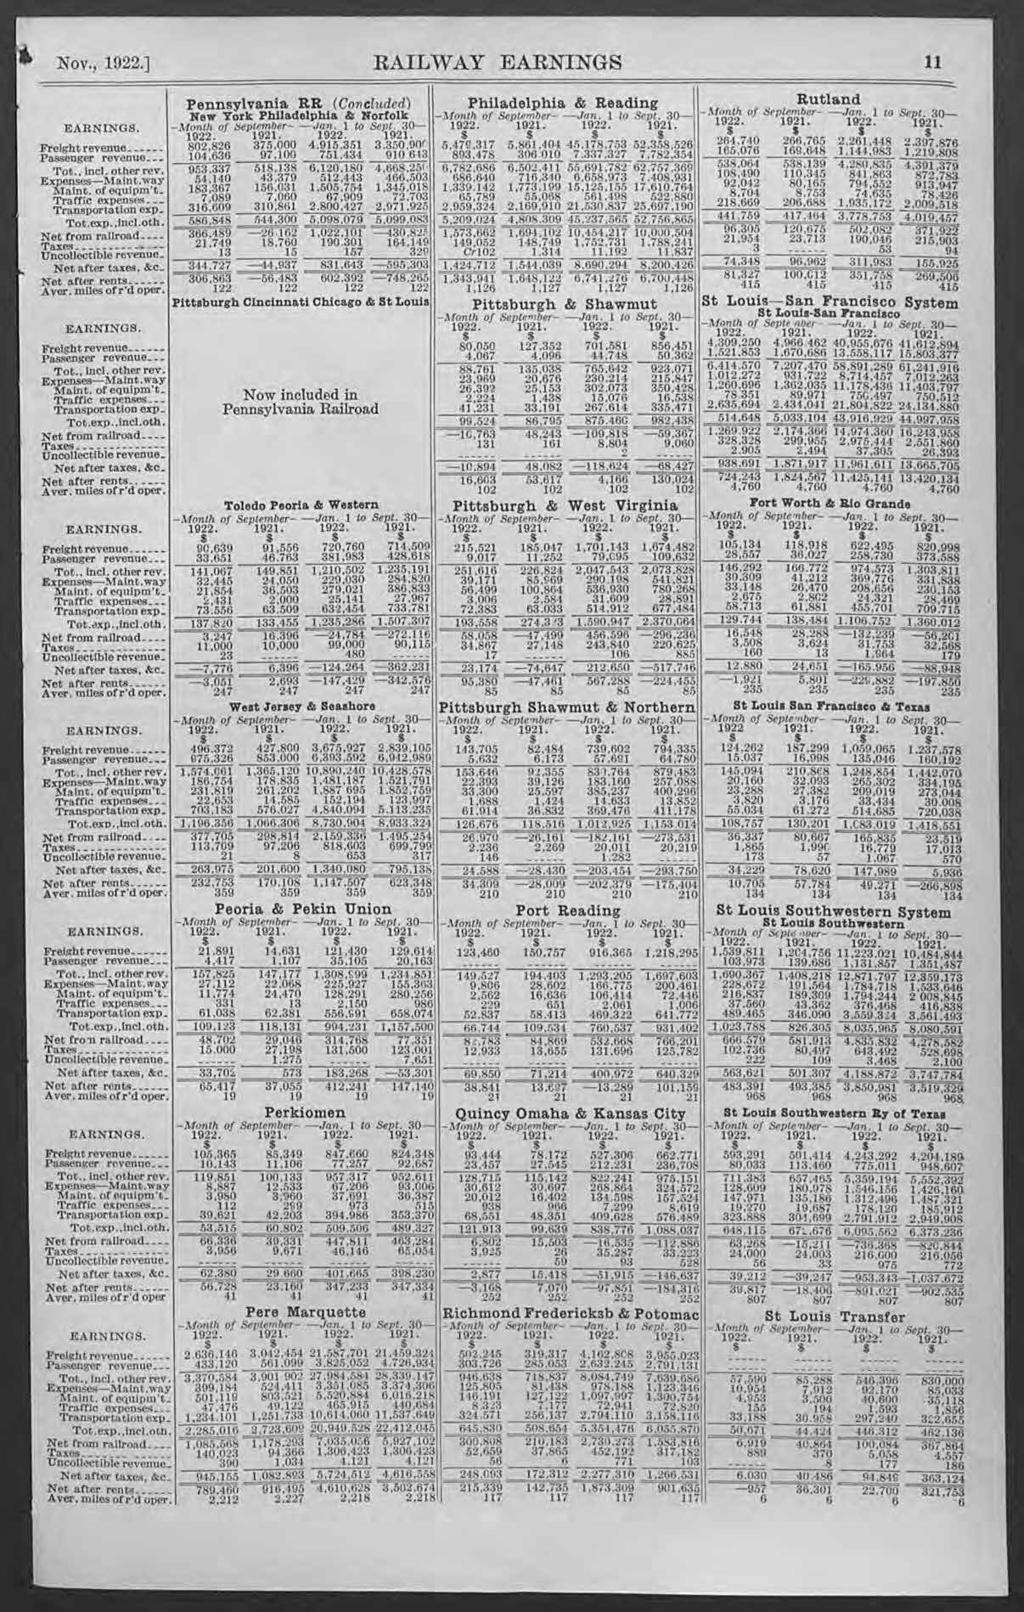 Nov., 1922.] RAILWAY EARNINGS 11 Passenger revenue_ Expenses-Maint.waY Tot.exp.,Incl.oth. Net from railroad.. Traffic expenses.. Net from railroad..... Traffic expenses_ Tot.exp.,incl.